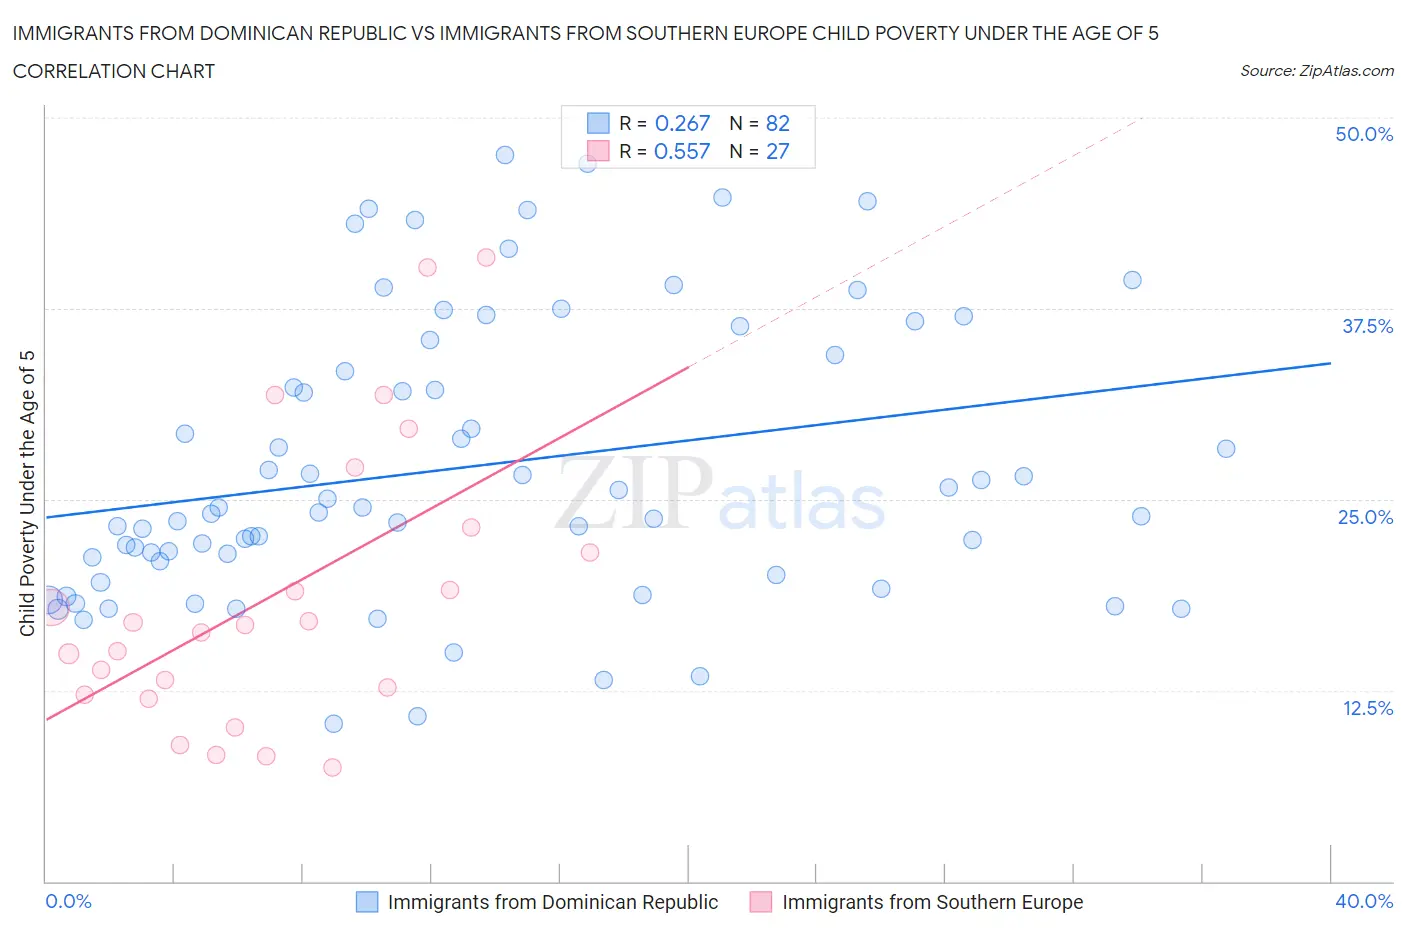 Immigrants from Dominican Republic vs Immigrants from Southern Europe Child Poverty Under the Age of 5